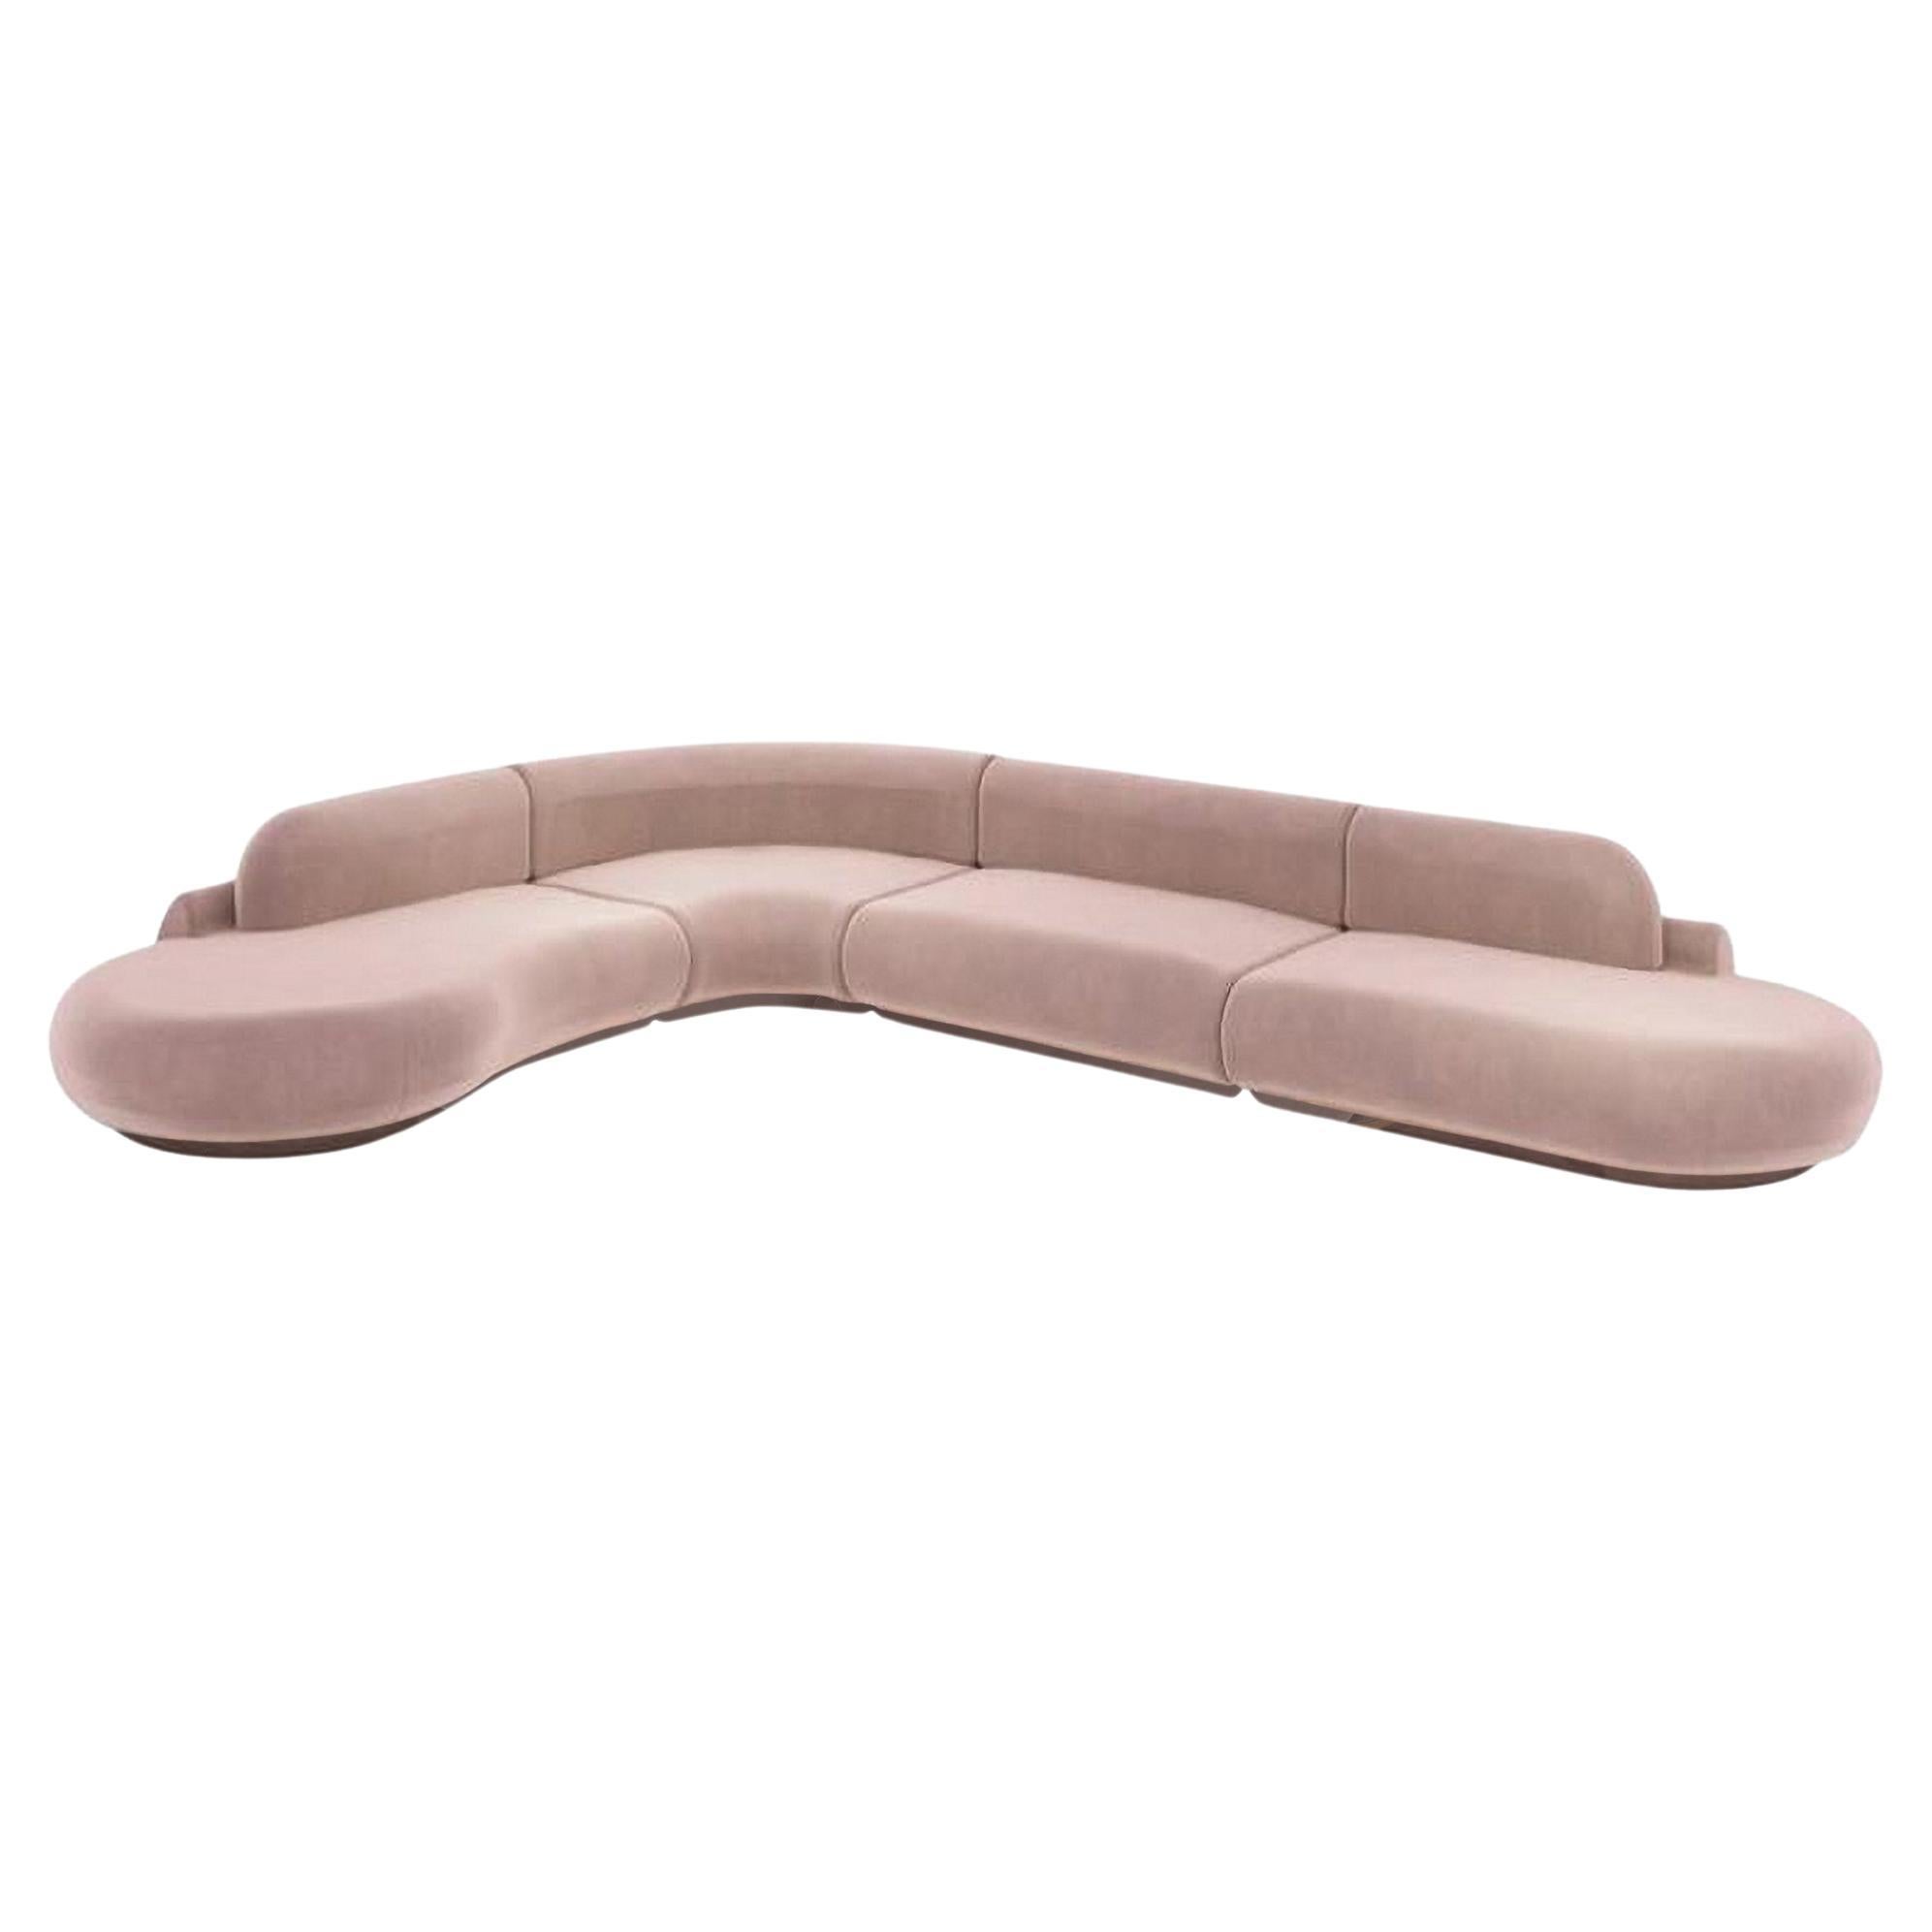 Naked Sectional Sofa, 4 Piece with Beech Ash-056-1 and Paris Mouse For Sale